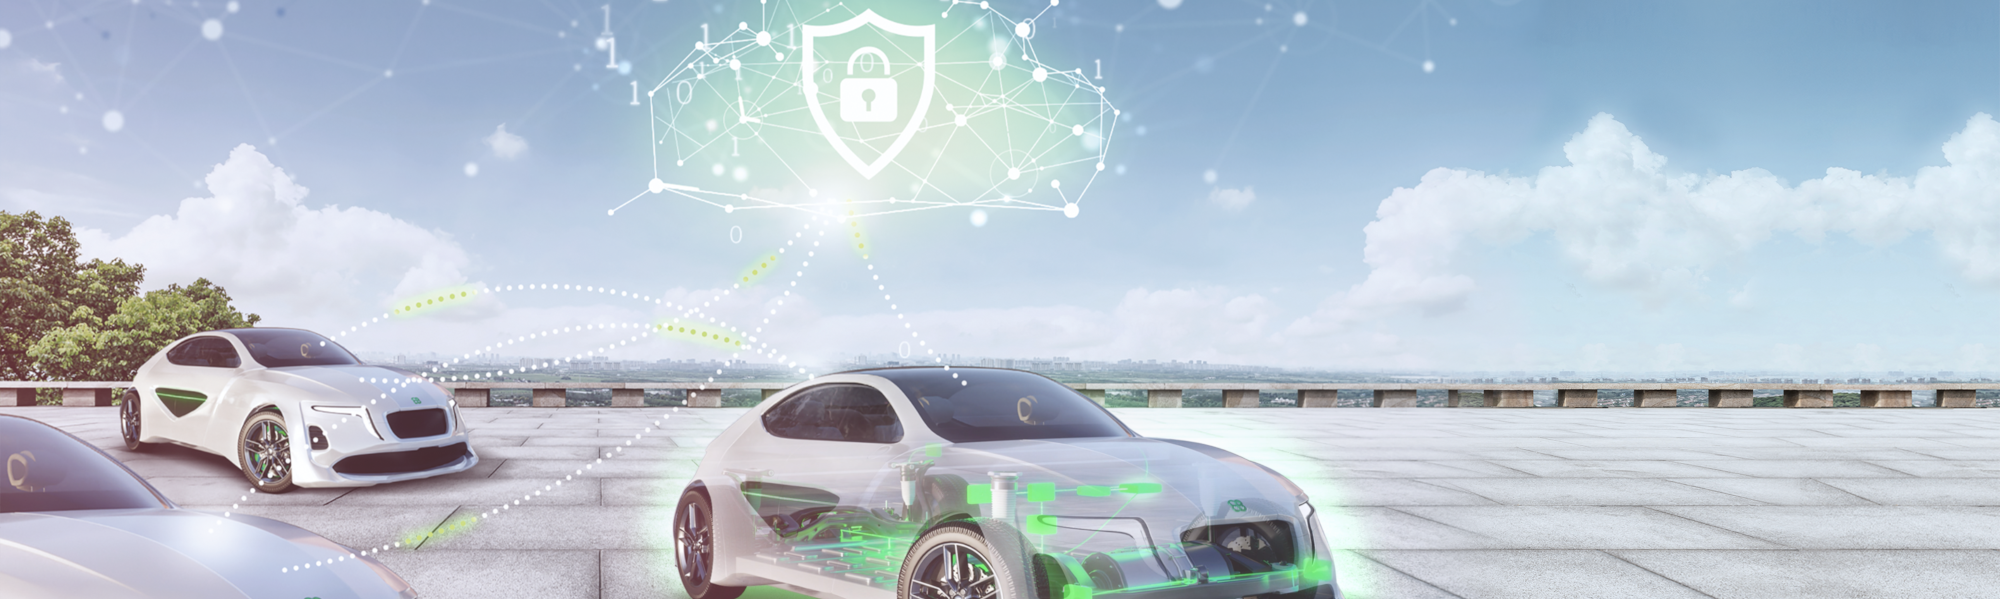 Connected Vehicle Software Security